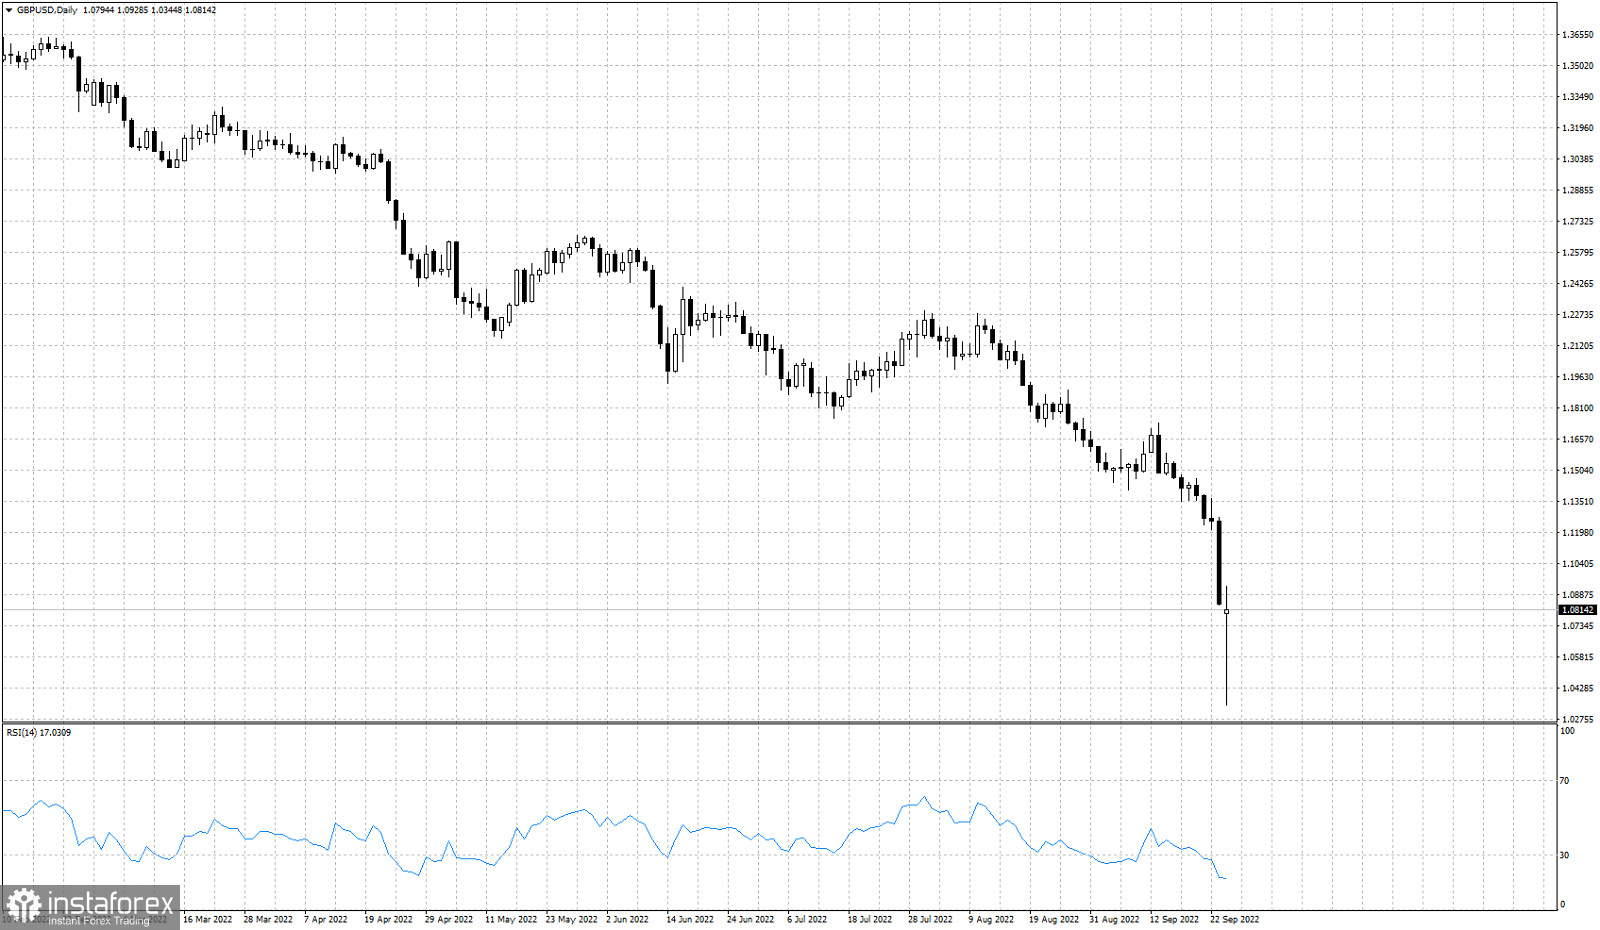 GBPUSD technical analysis for September 26th, 2022.